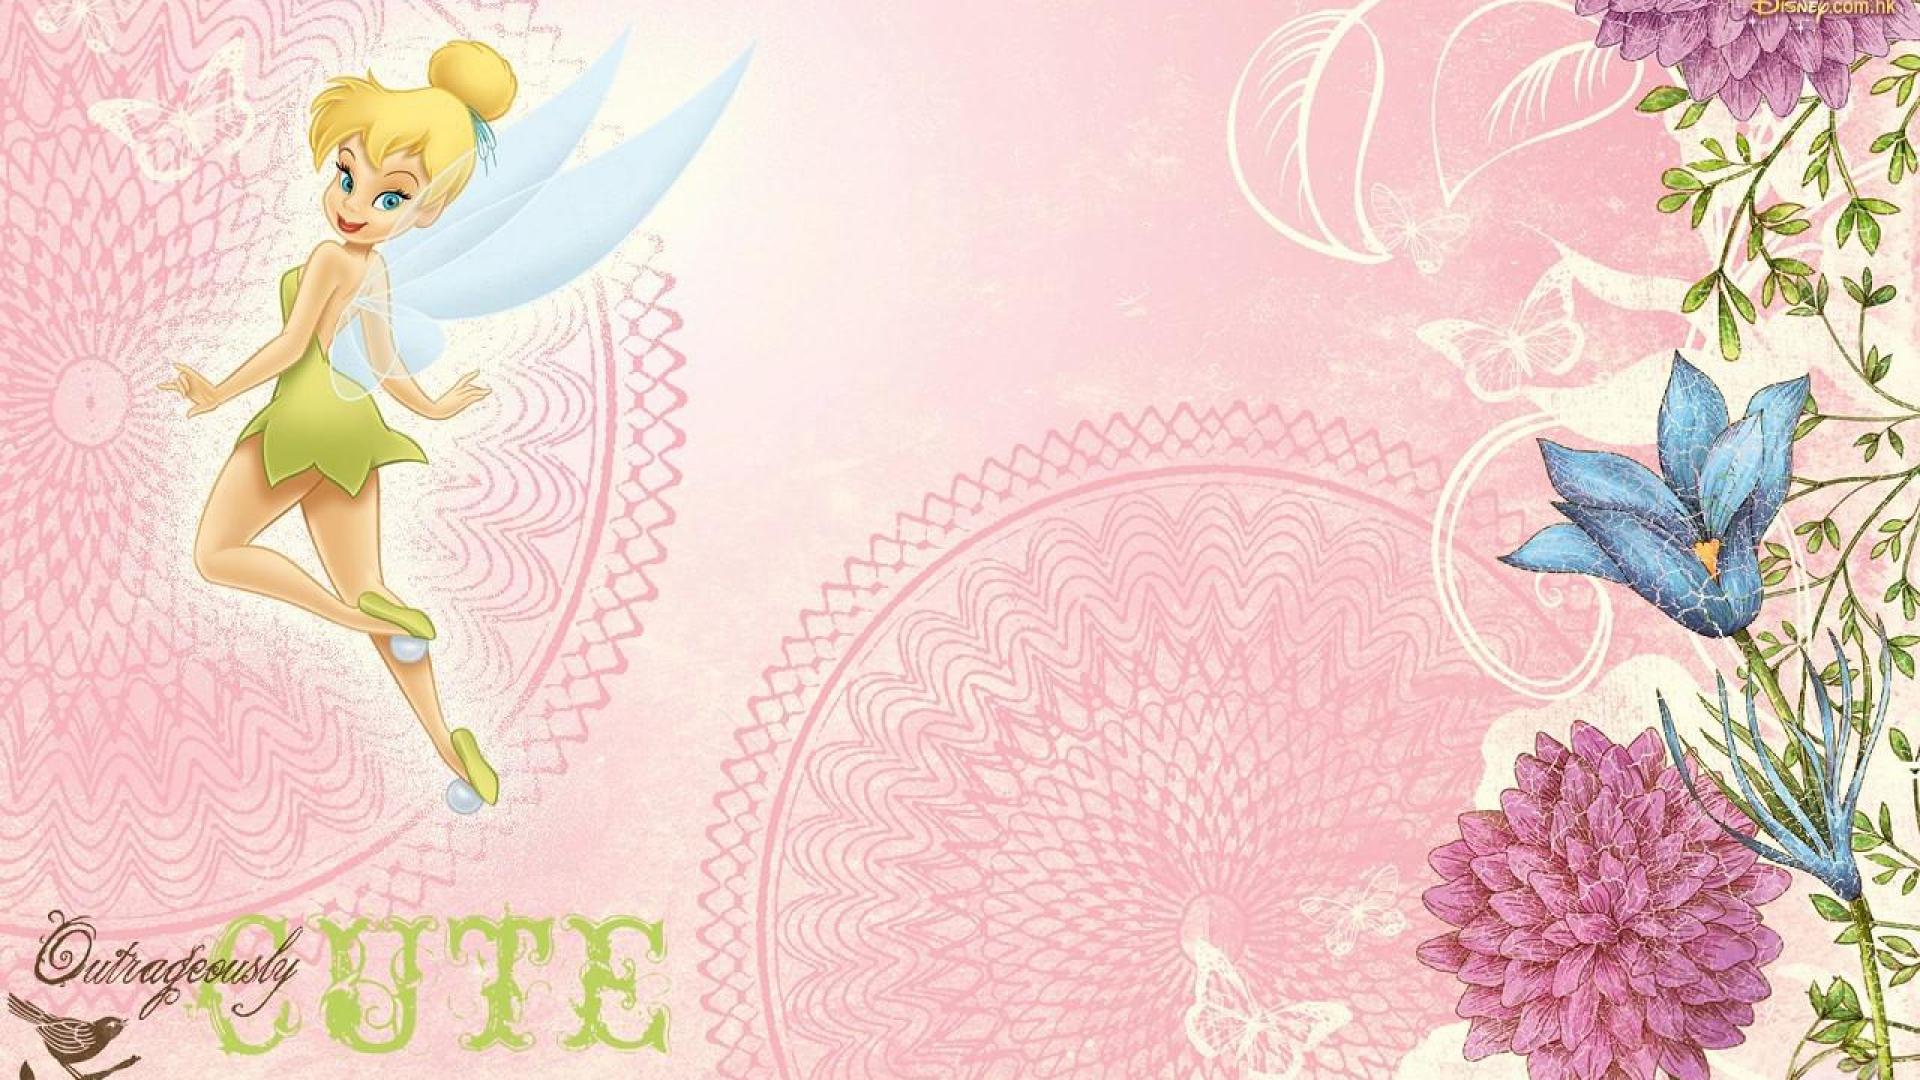 Tinkerbell - (#140473) - High Quality and Resolution Wallpapers on ...